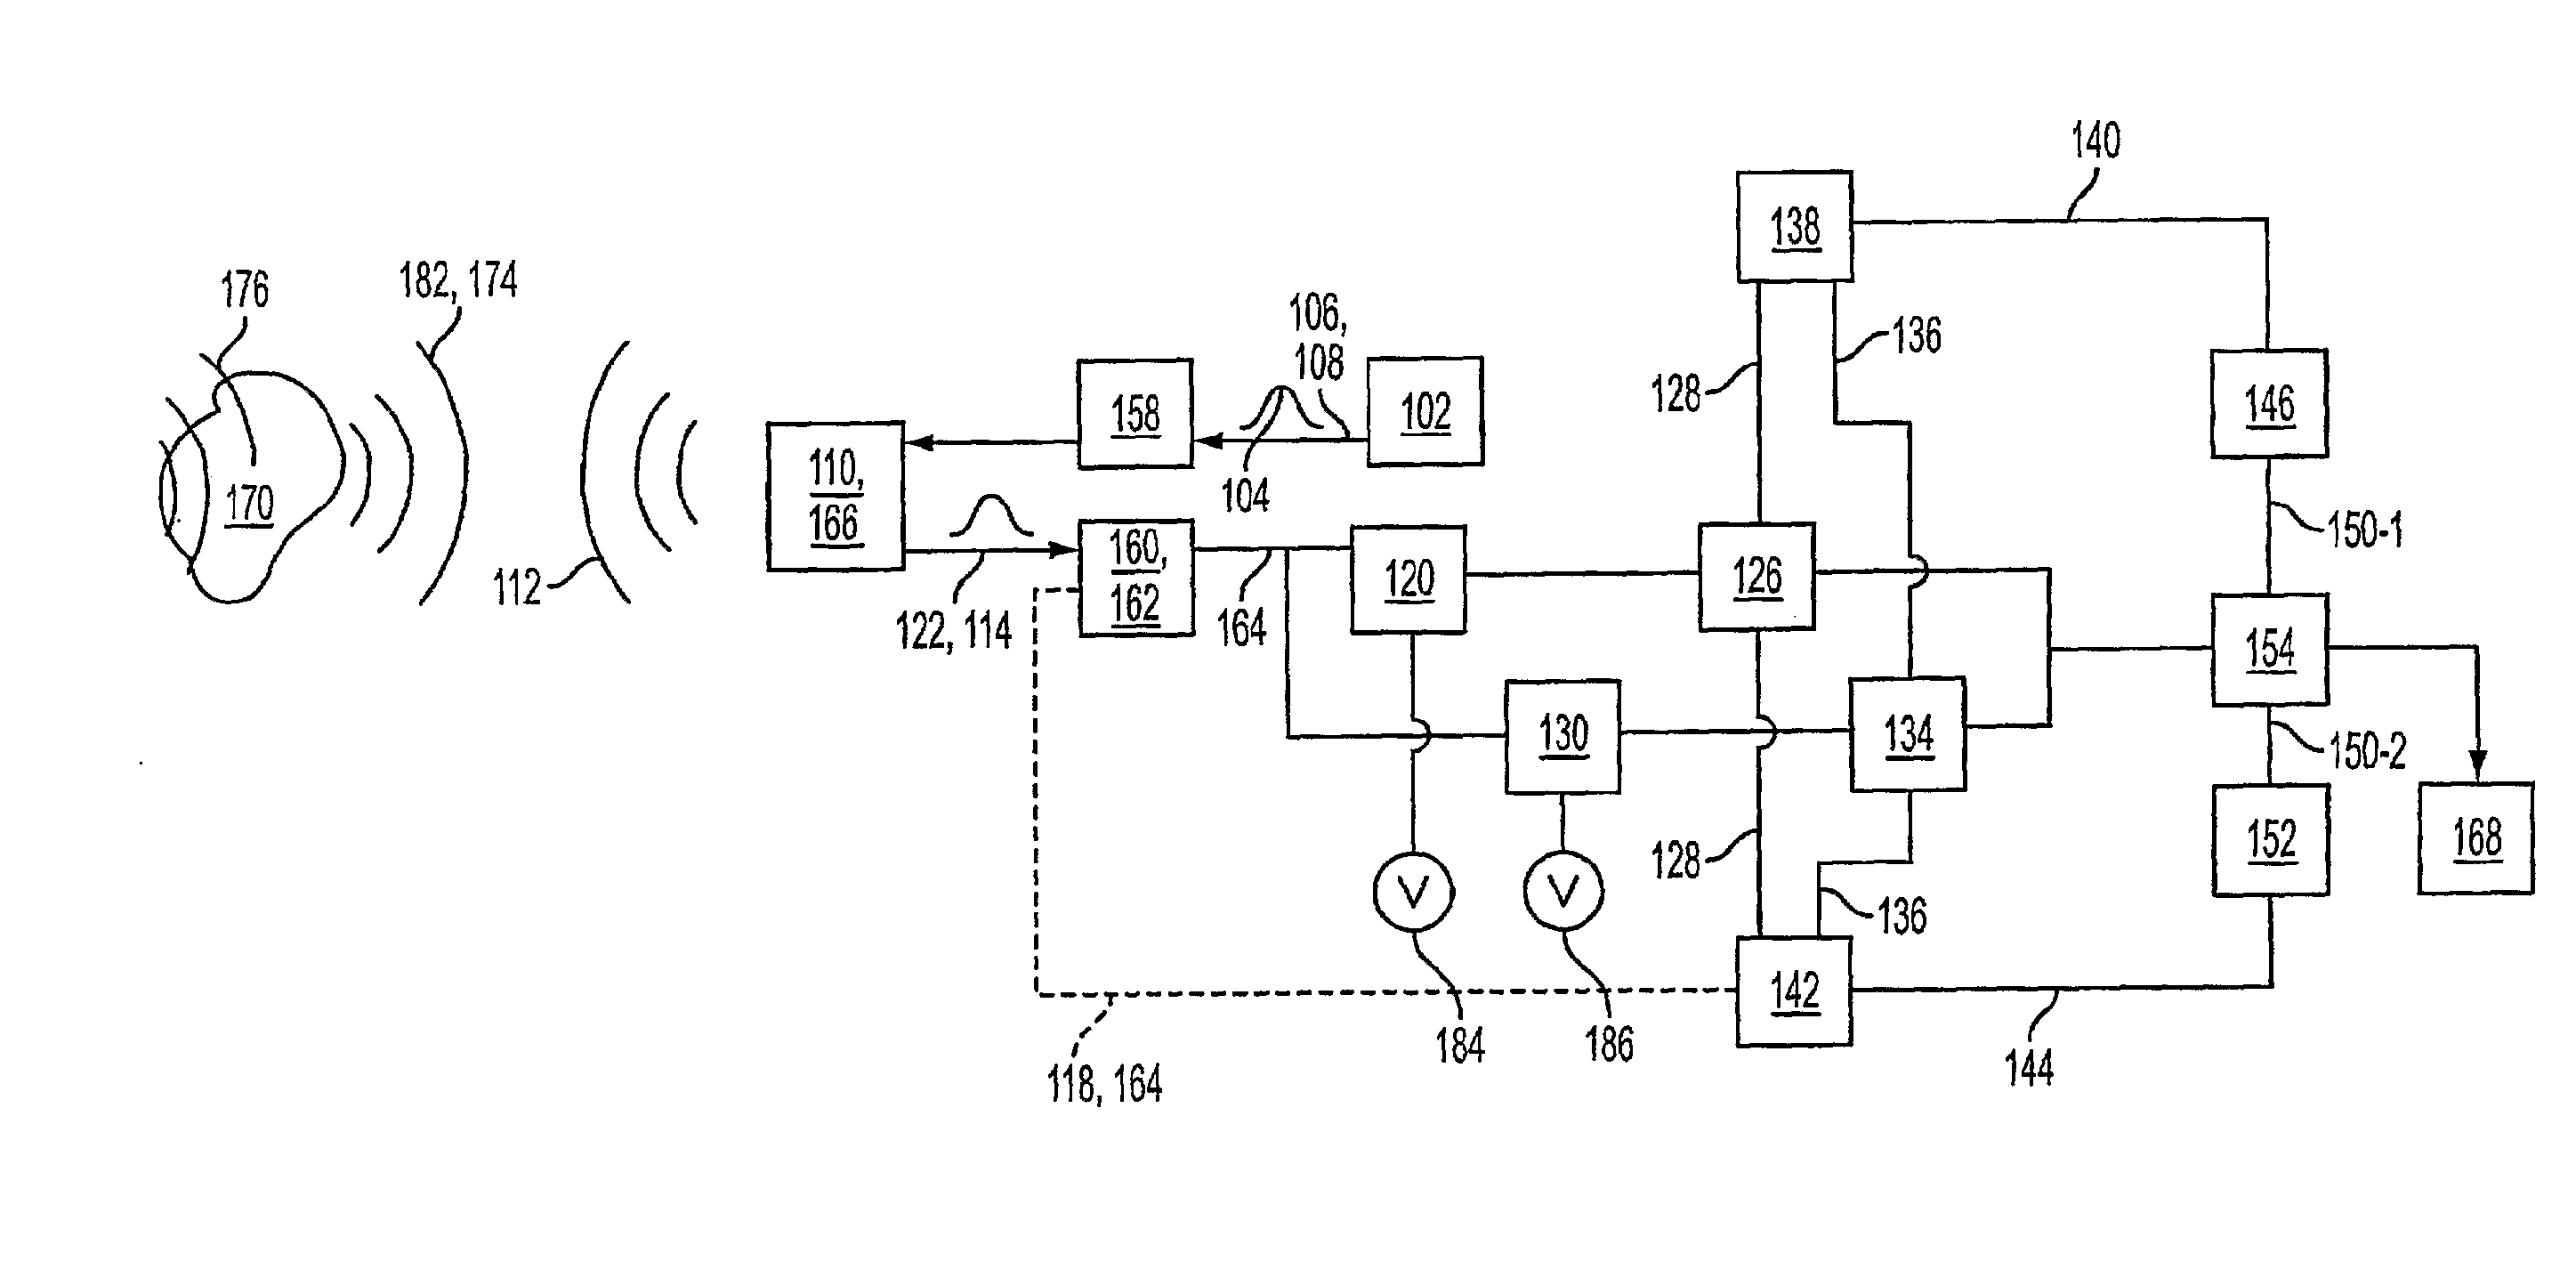 Ultrasound imaging beam-former apparatus and method